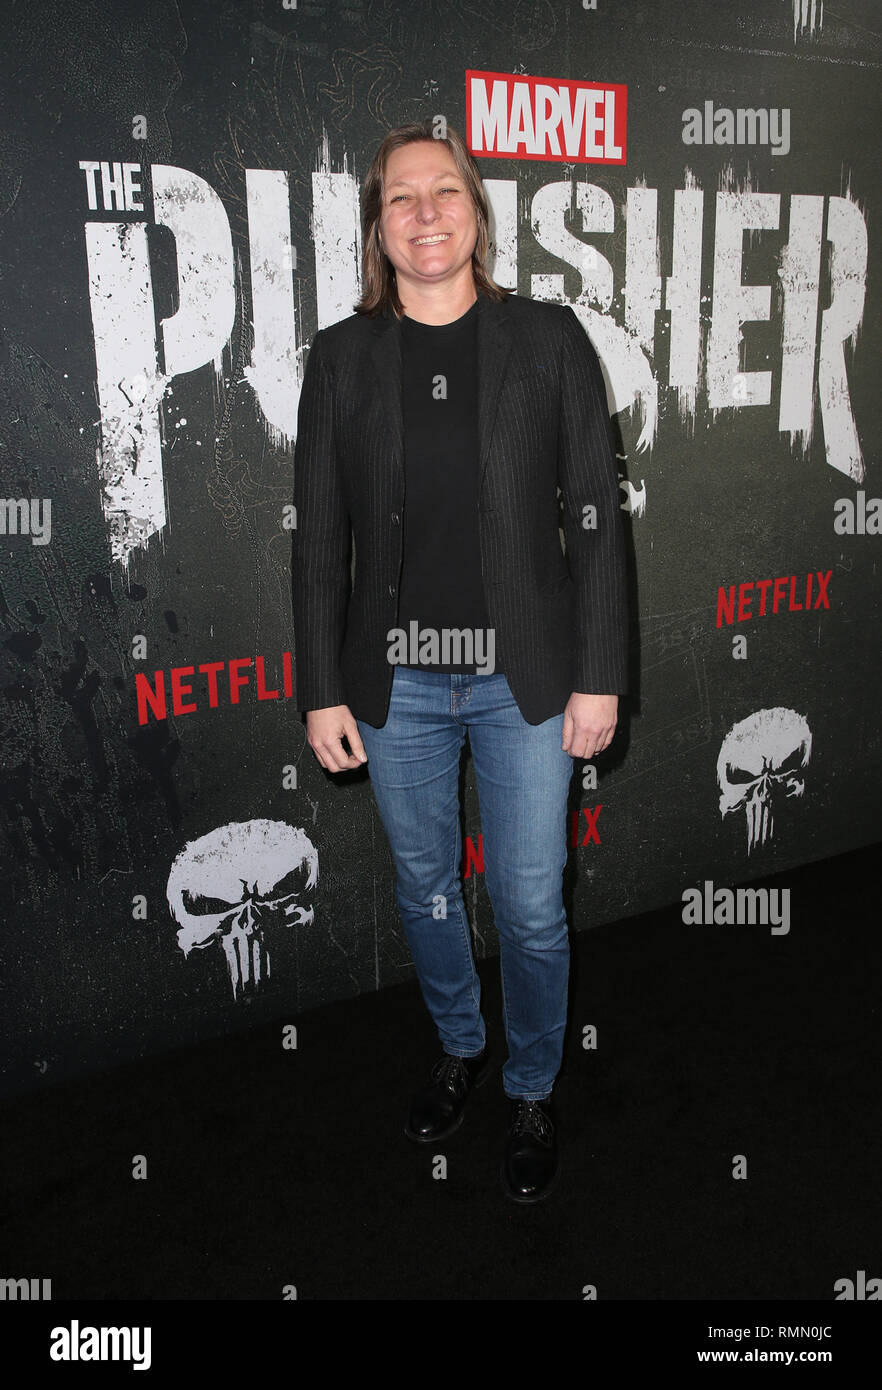 Marvel's "The Punisher" Los Angeles Premiere  Featuring: Cindy Holland Where: Hollywood, California, United States When: 14 Jan 2019 Credit: FayesVision/WENN.com Stock Photo